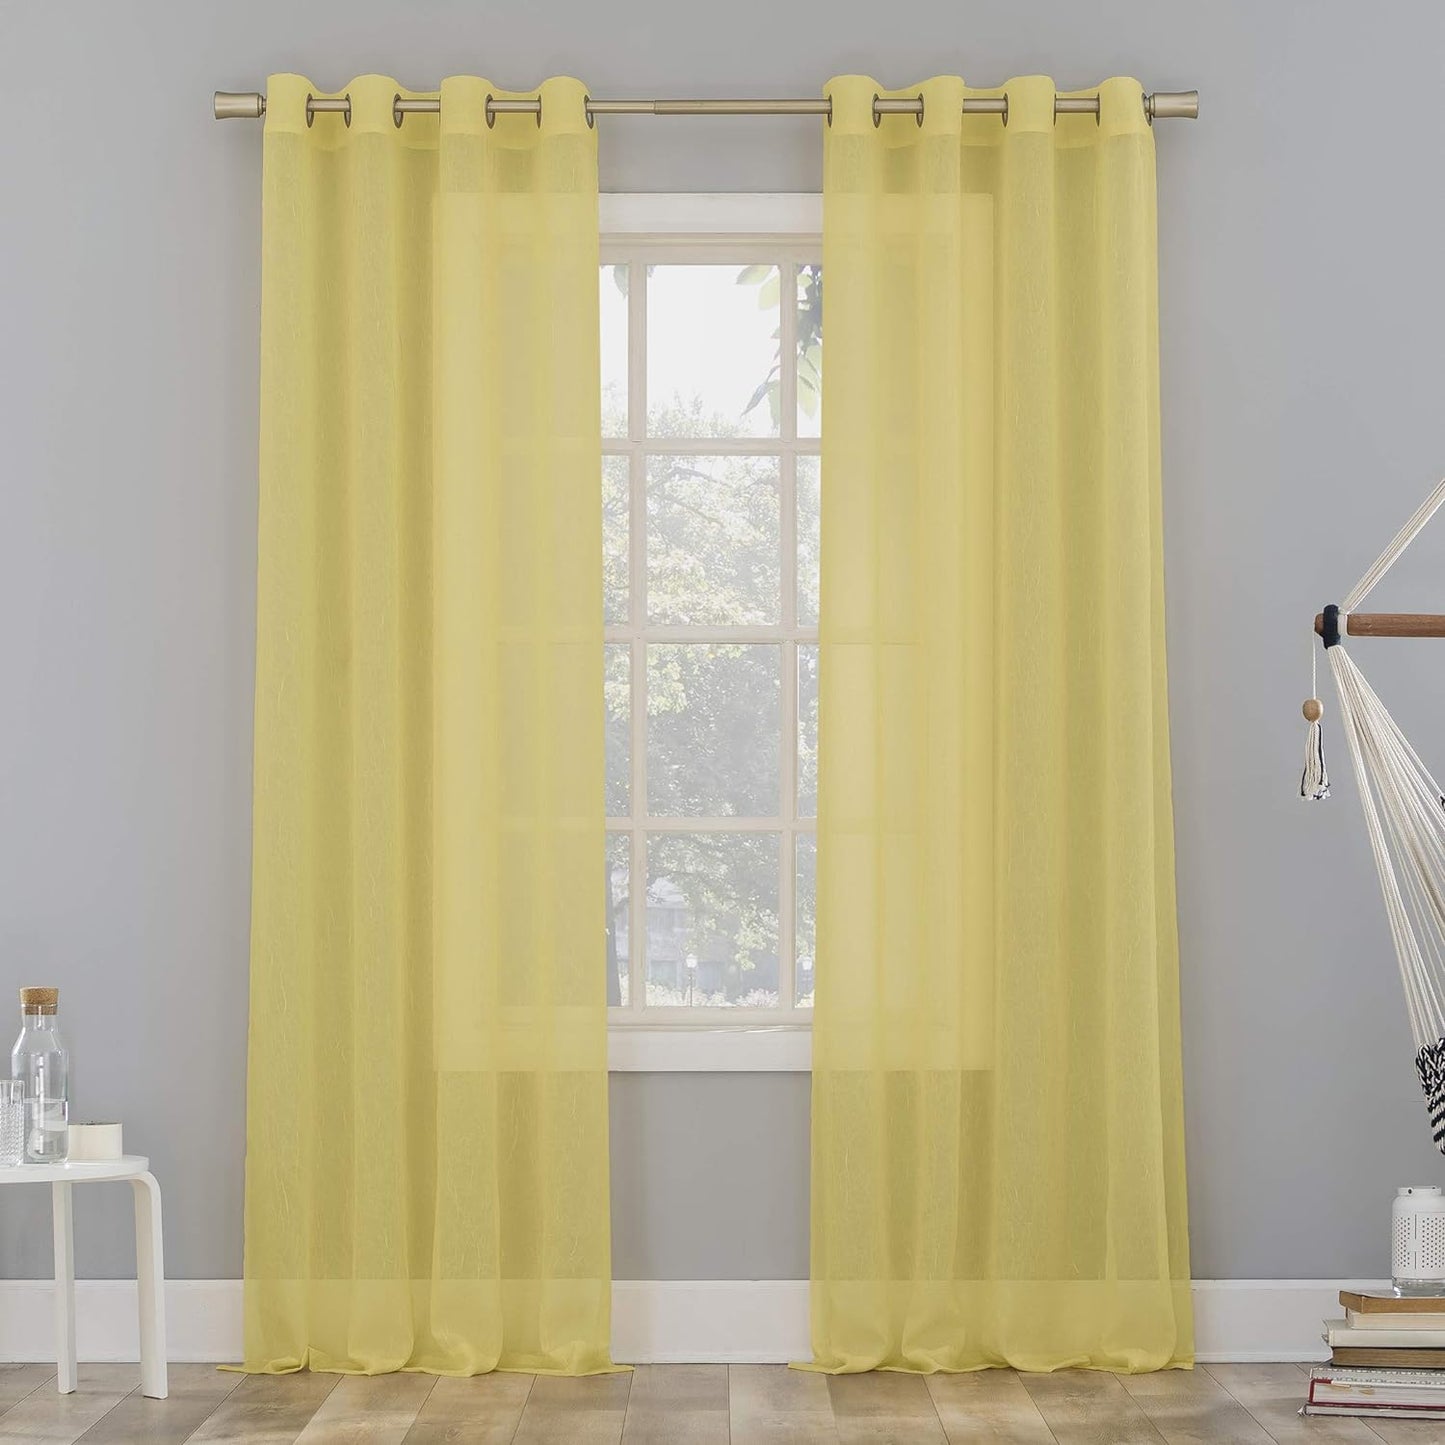 No. 918 Erica Crushed Sheer Voile Grommet Curtain Panel 84.00" X 51.00"  No. 918 Yellow 51" X 63" Panel 